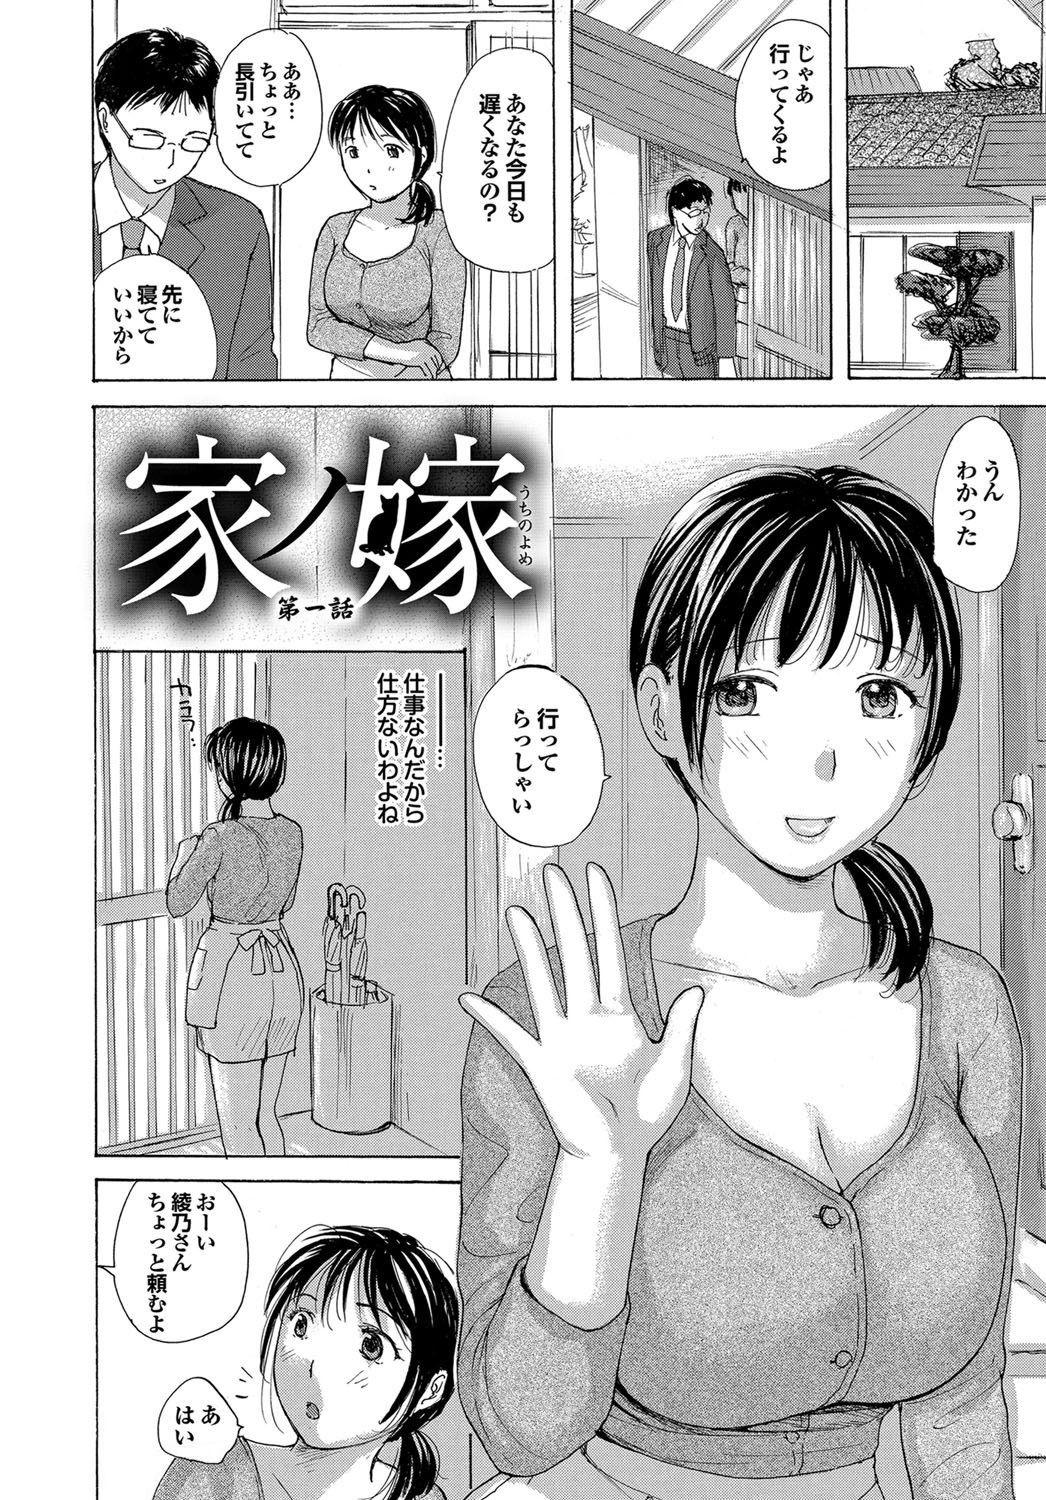 Action Uchi no Yome Ch.01 8teen - Page 5